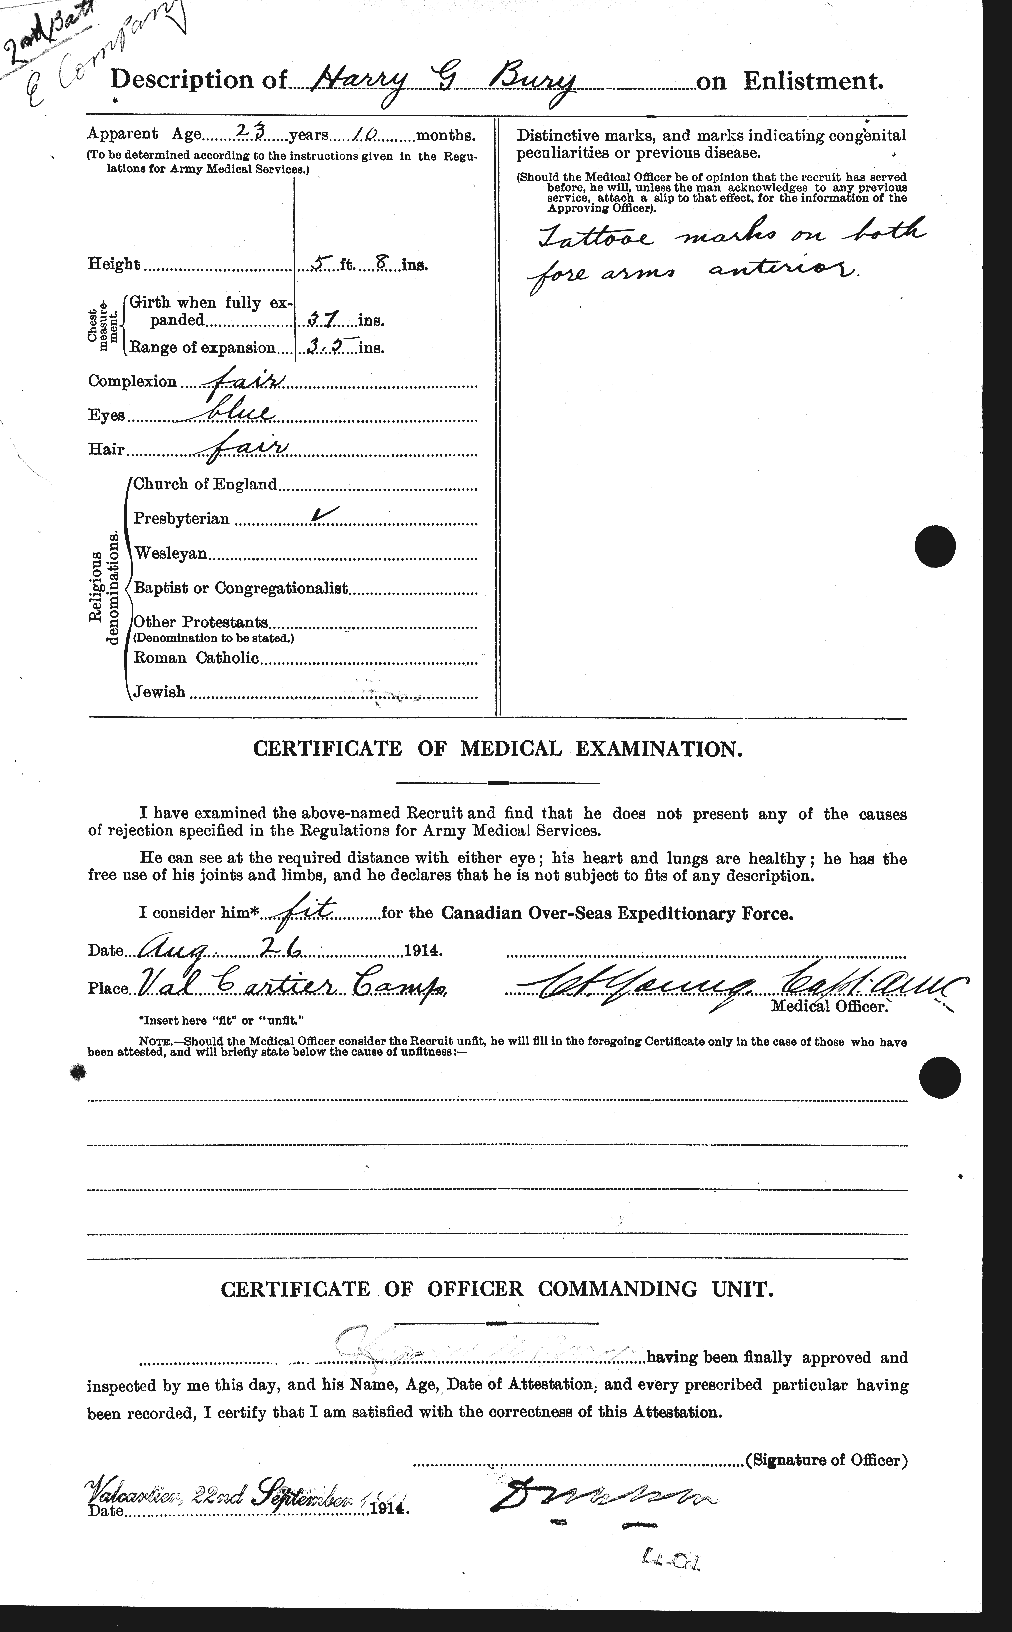 Personnel Records of the First World War - CEF 272839b